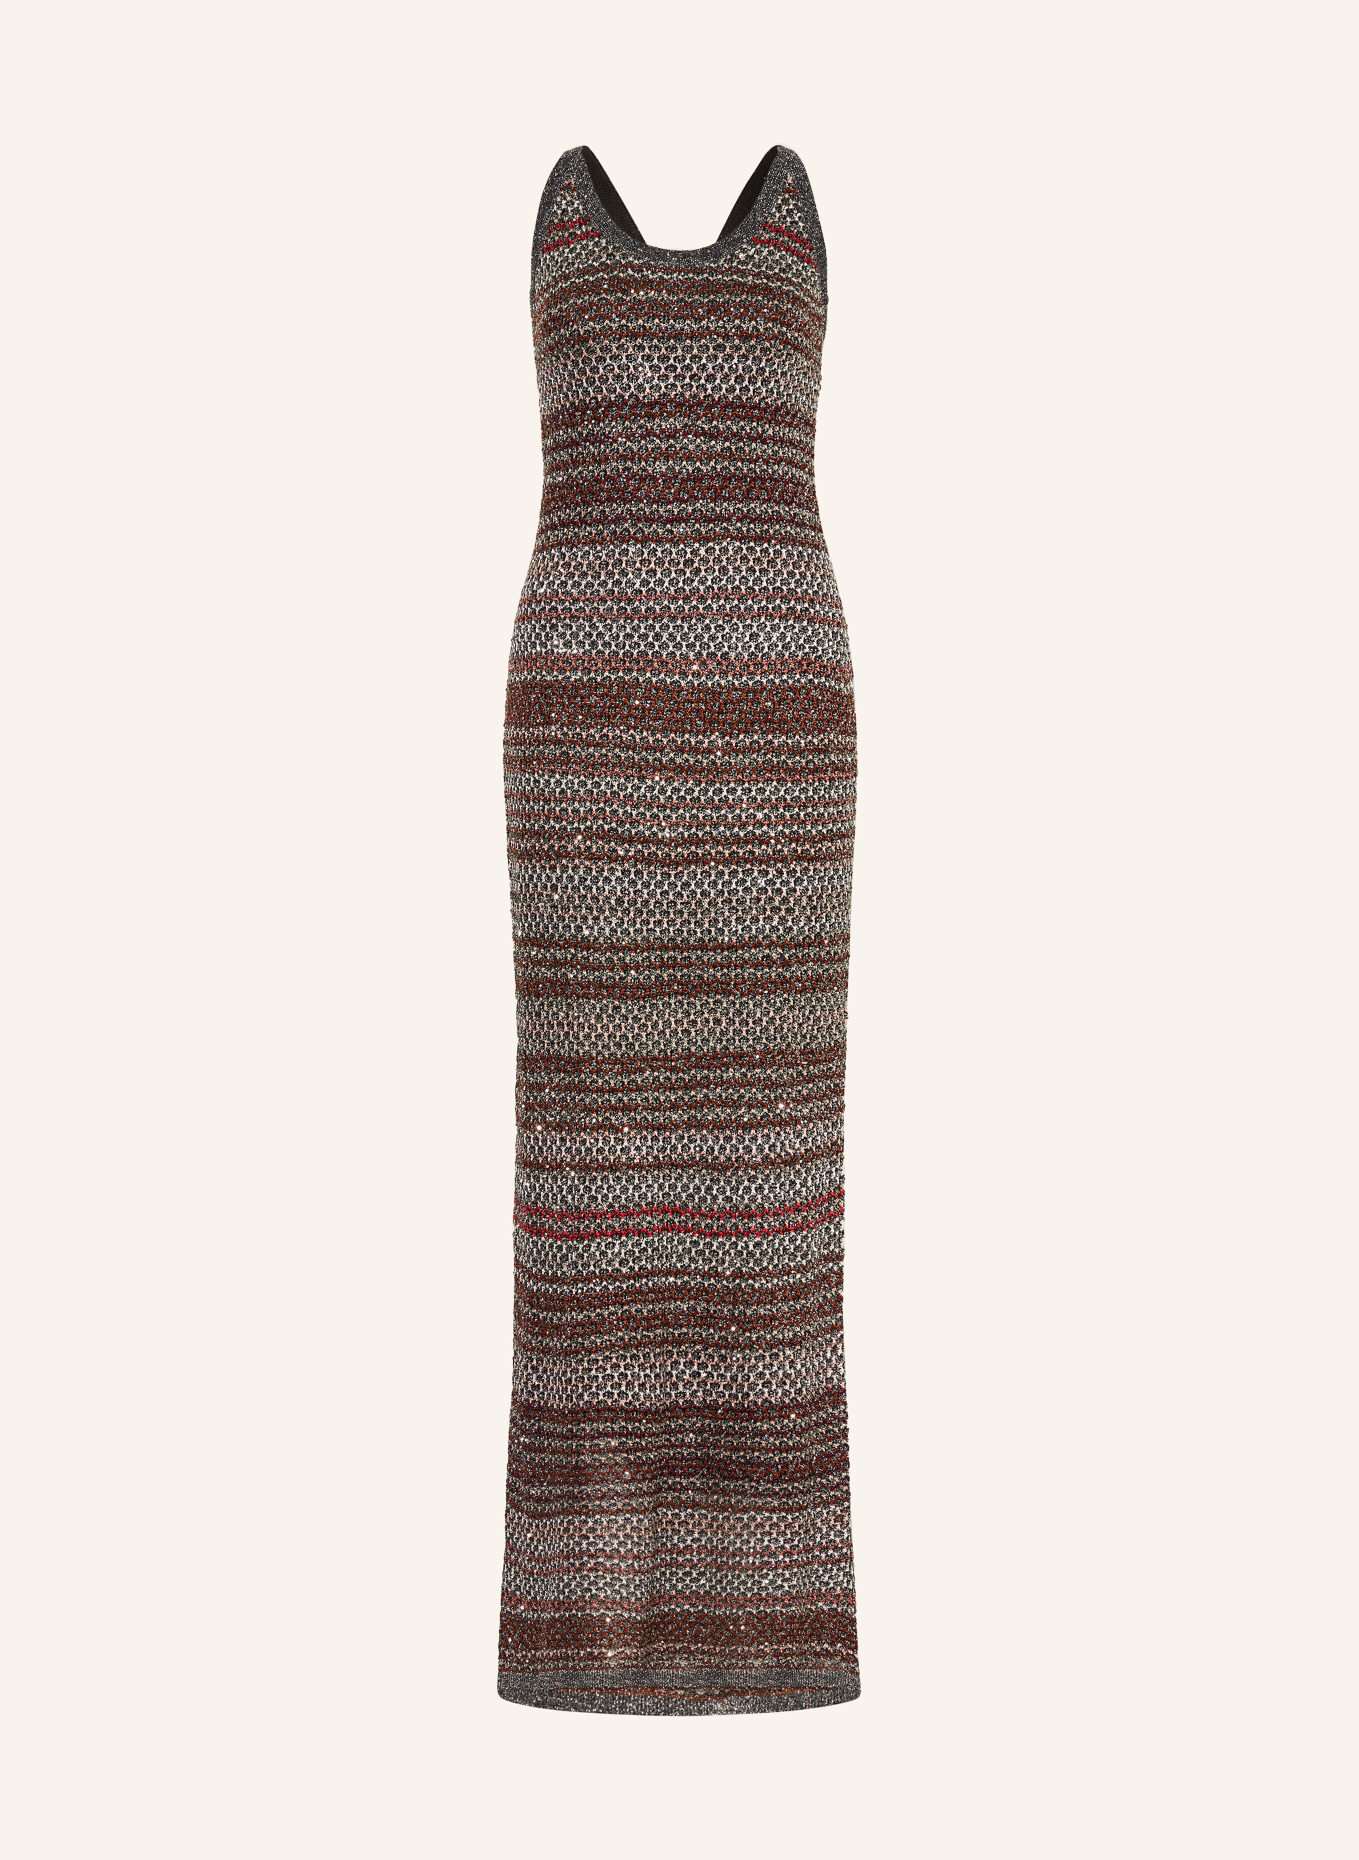 MISSONI Knit dress with sequins, Color: BLACK/ DARK RED/ SILVER (Image 1)